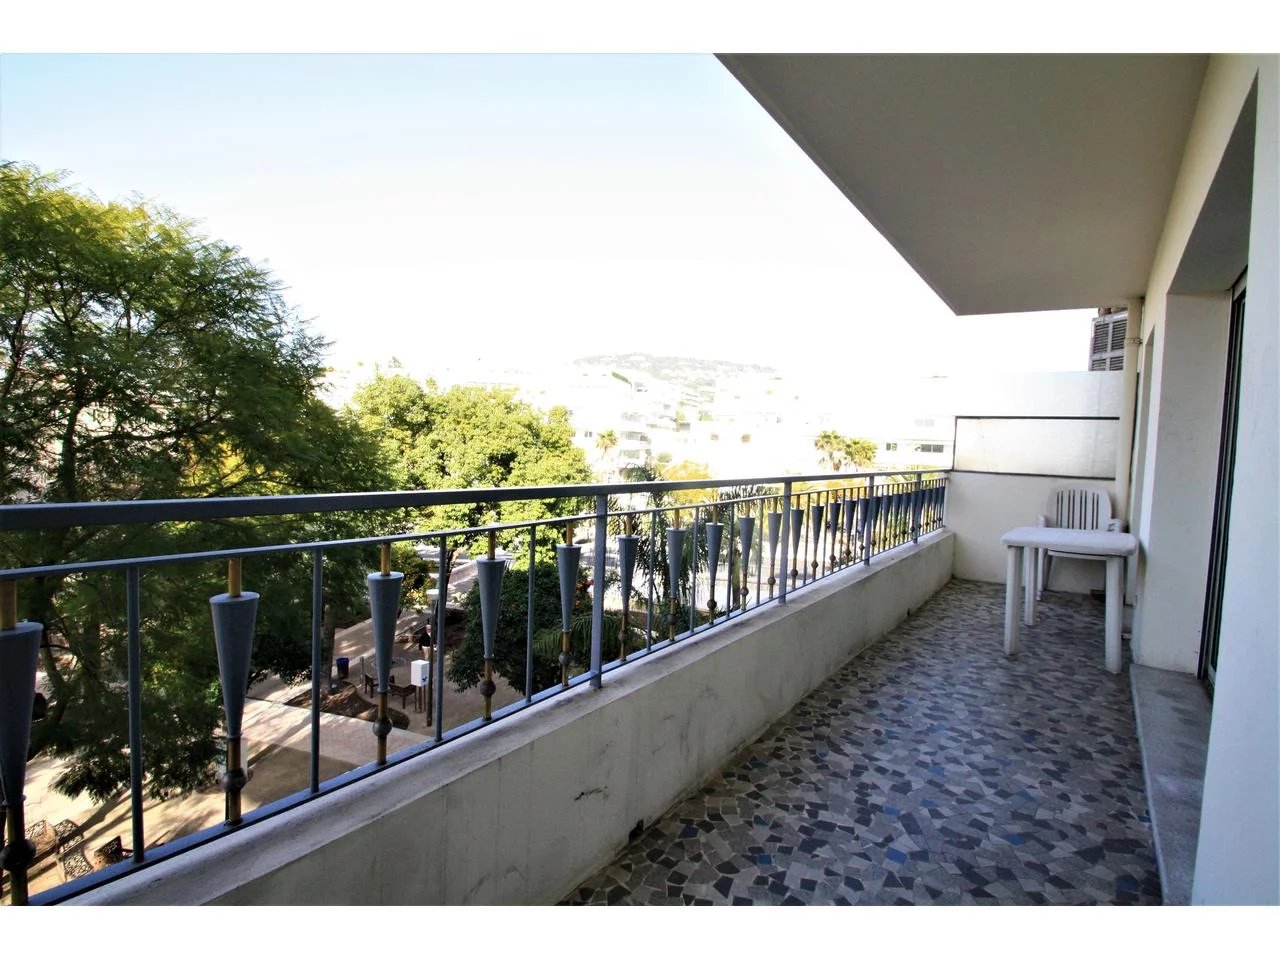 1 bedroom apartment with large terrace - 10 min from the Croisette